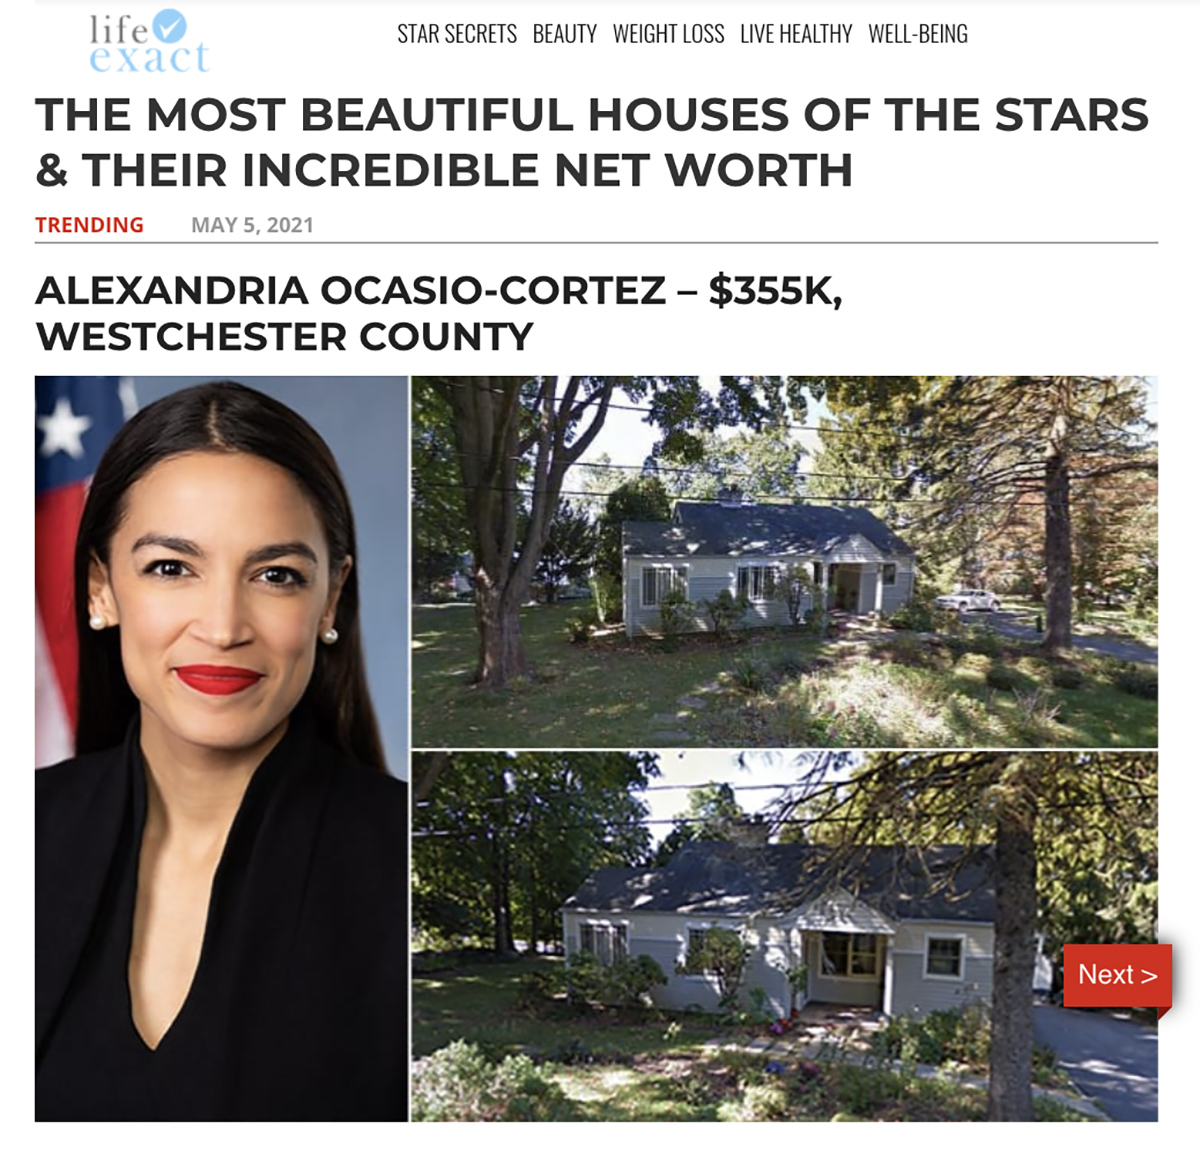 AOC whose full name is Alexandria Ocasio-Cortez does not own one of the world's most expensive houses.